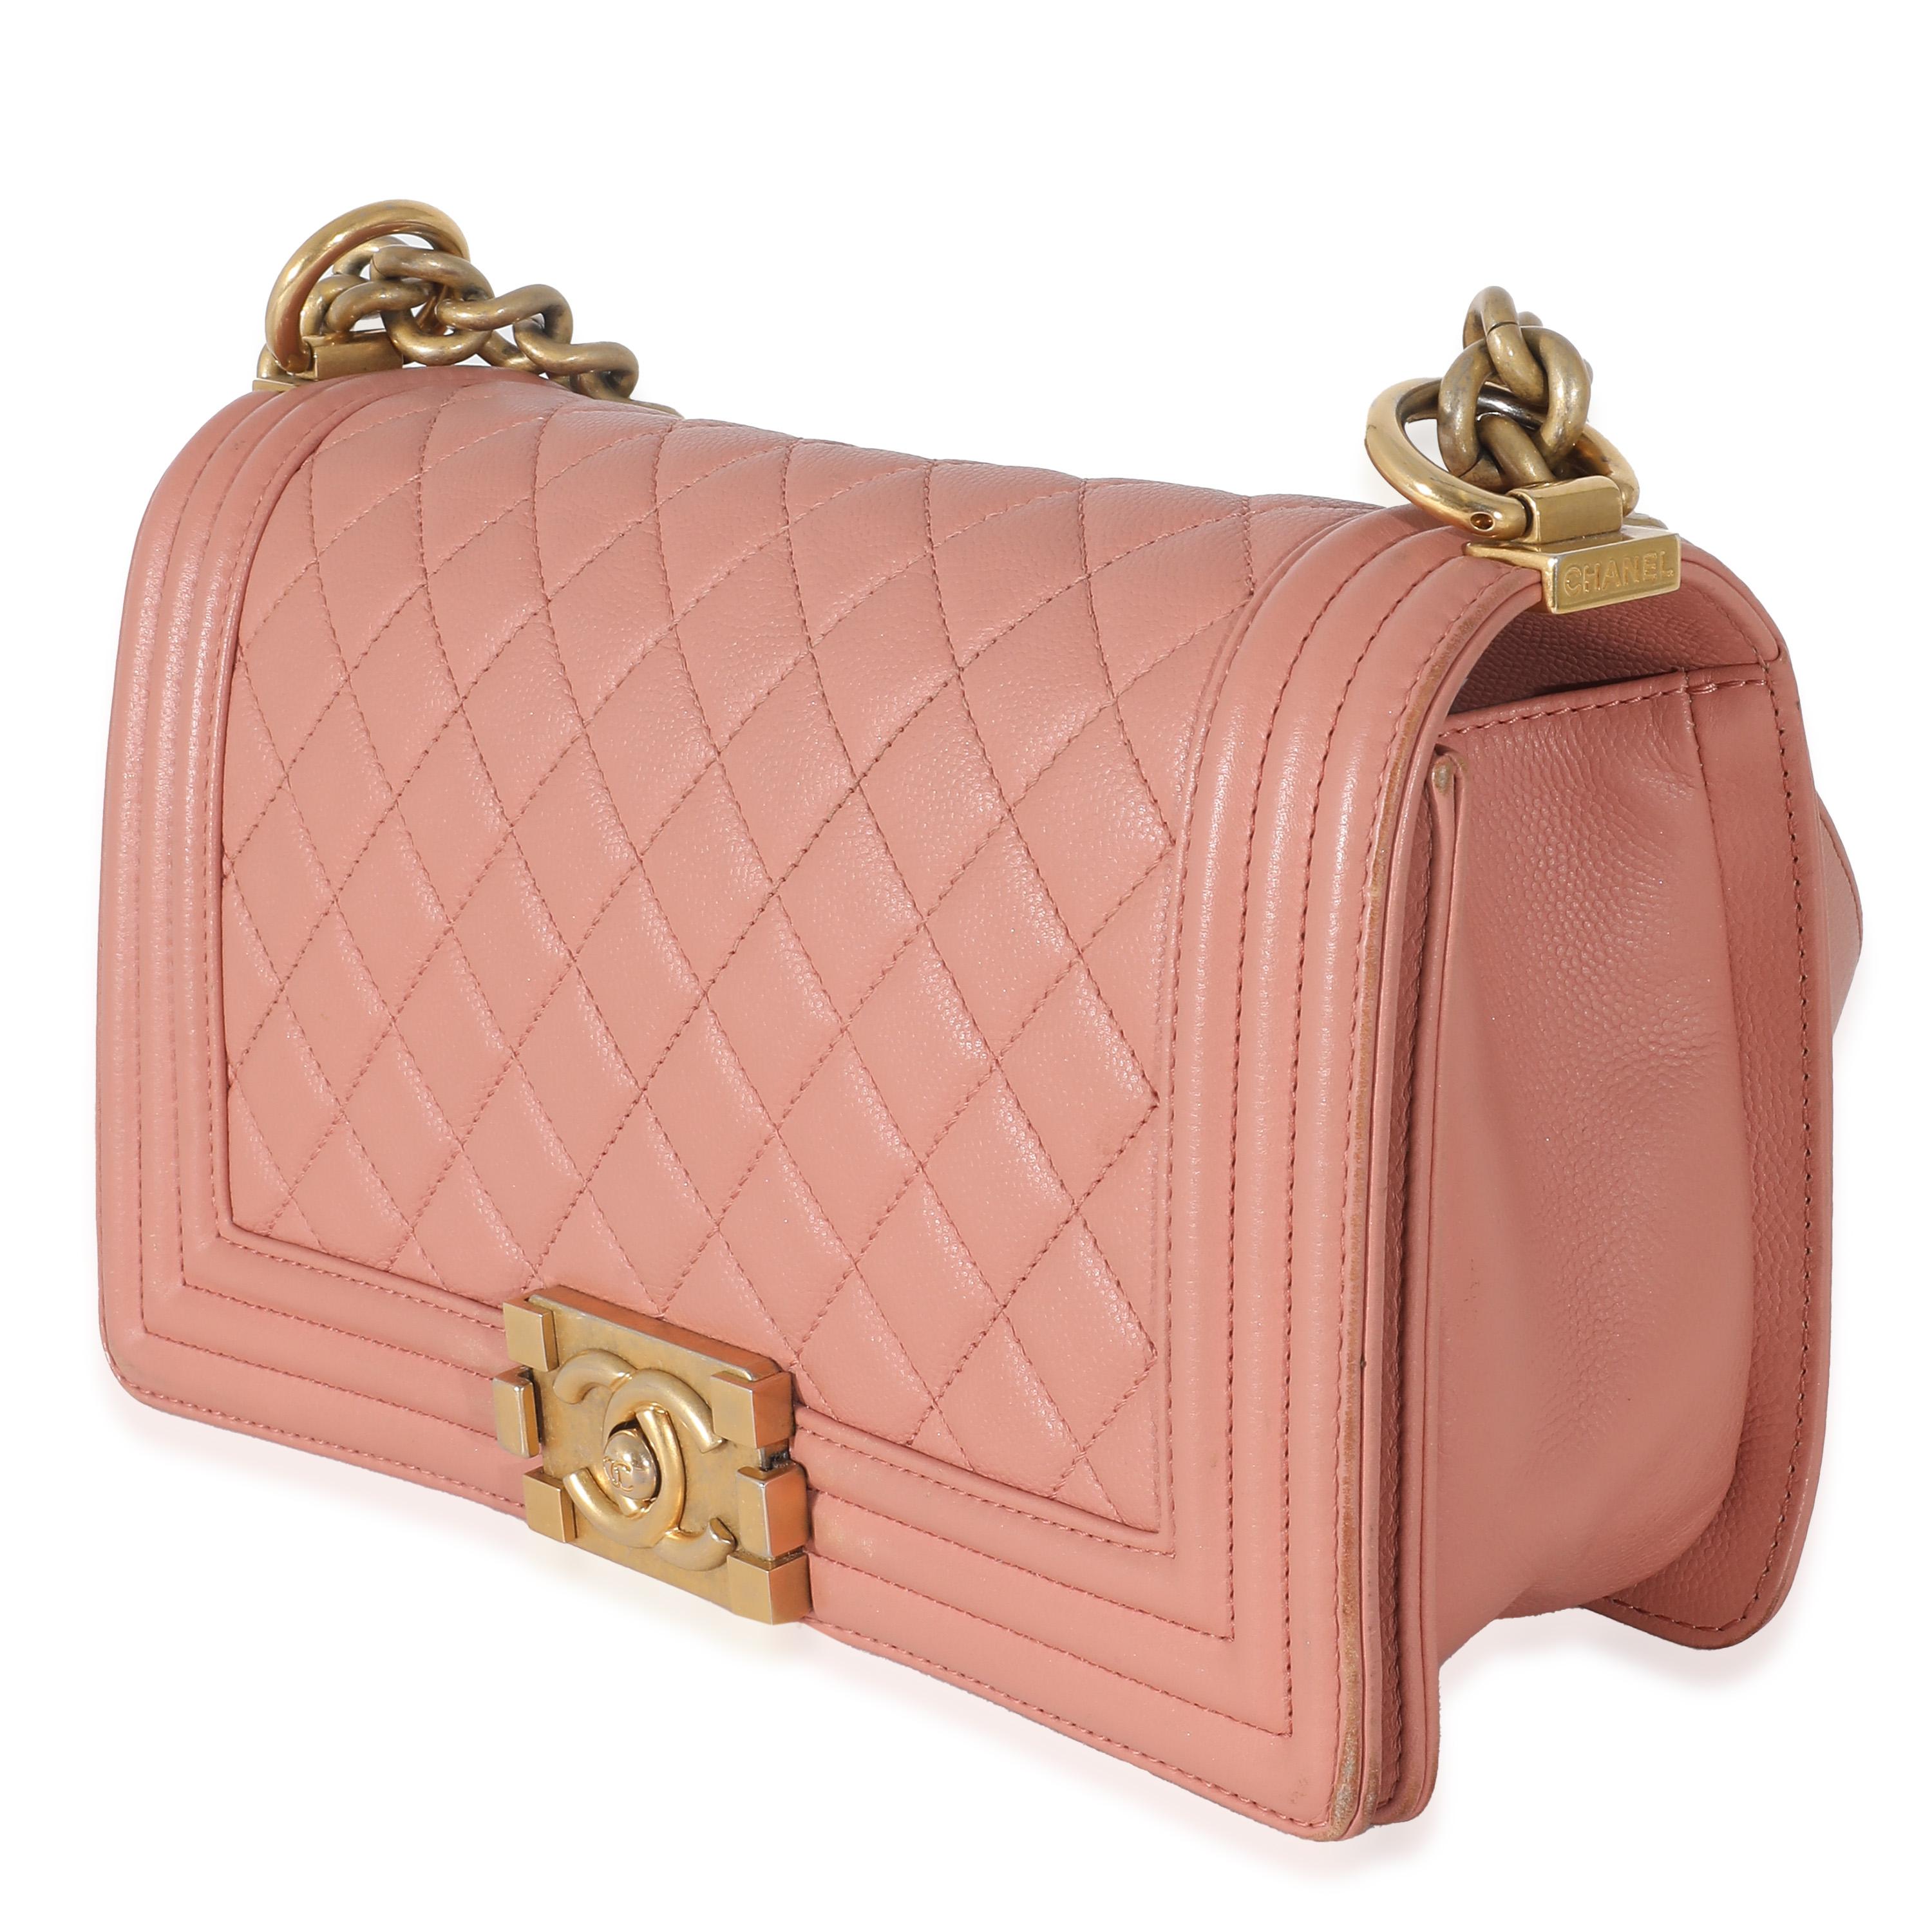 Pink Quilted Caviar Old Medium Boy Bag In Excellent Condition For Sale In New York, NY